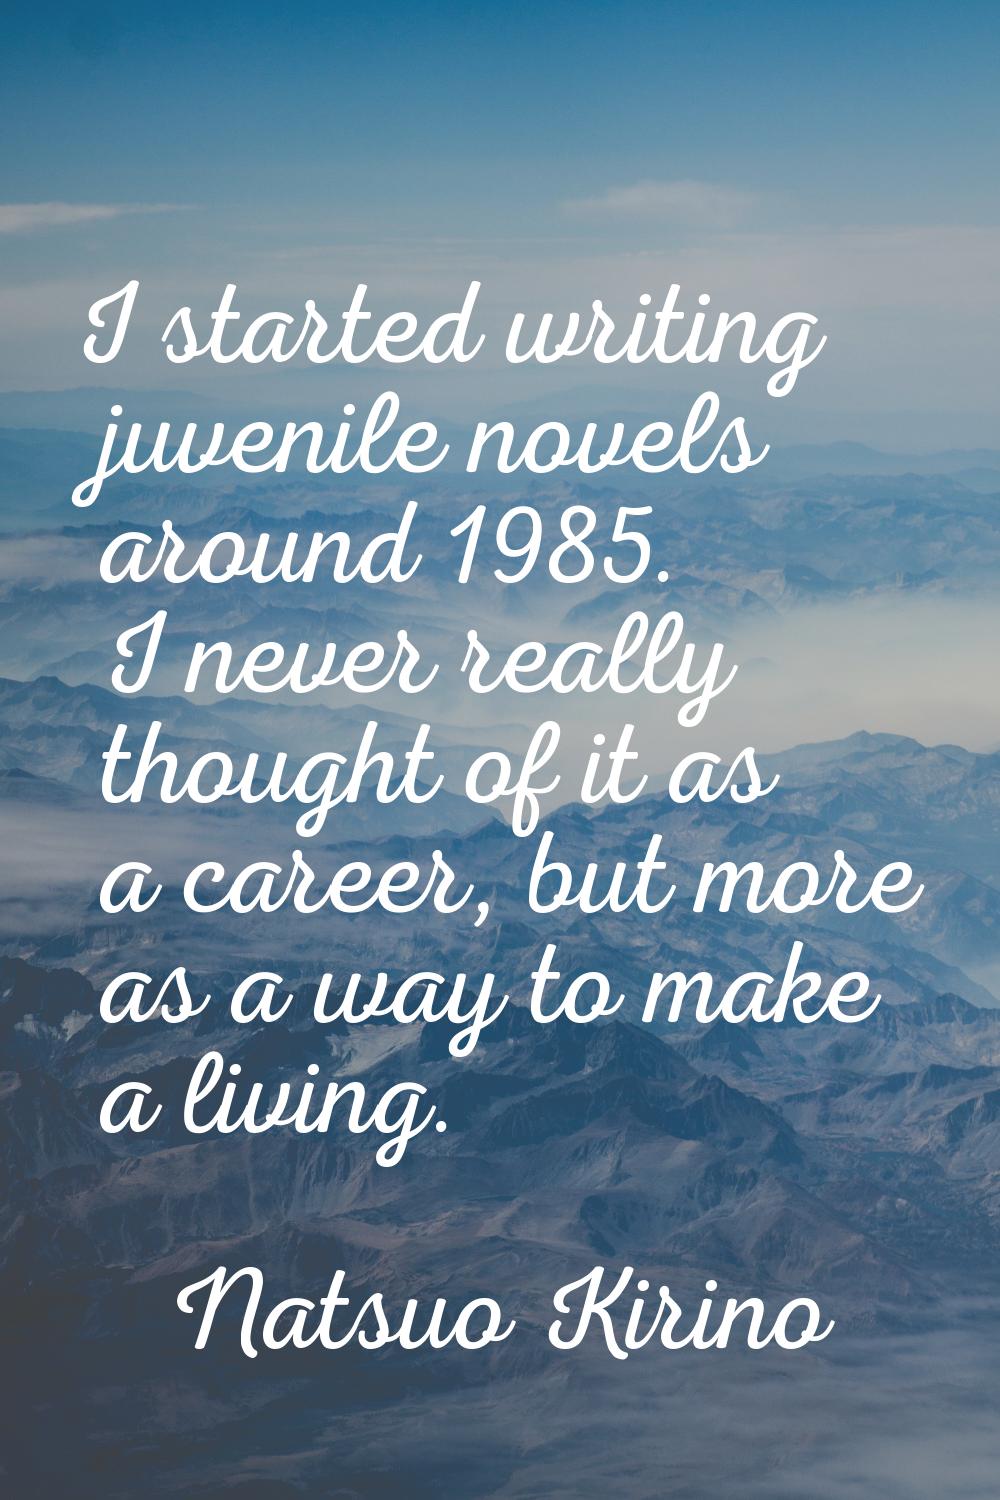 I started writing juvenile novels around 1985. I never really thought of it as a career, but more a